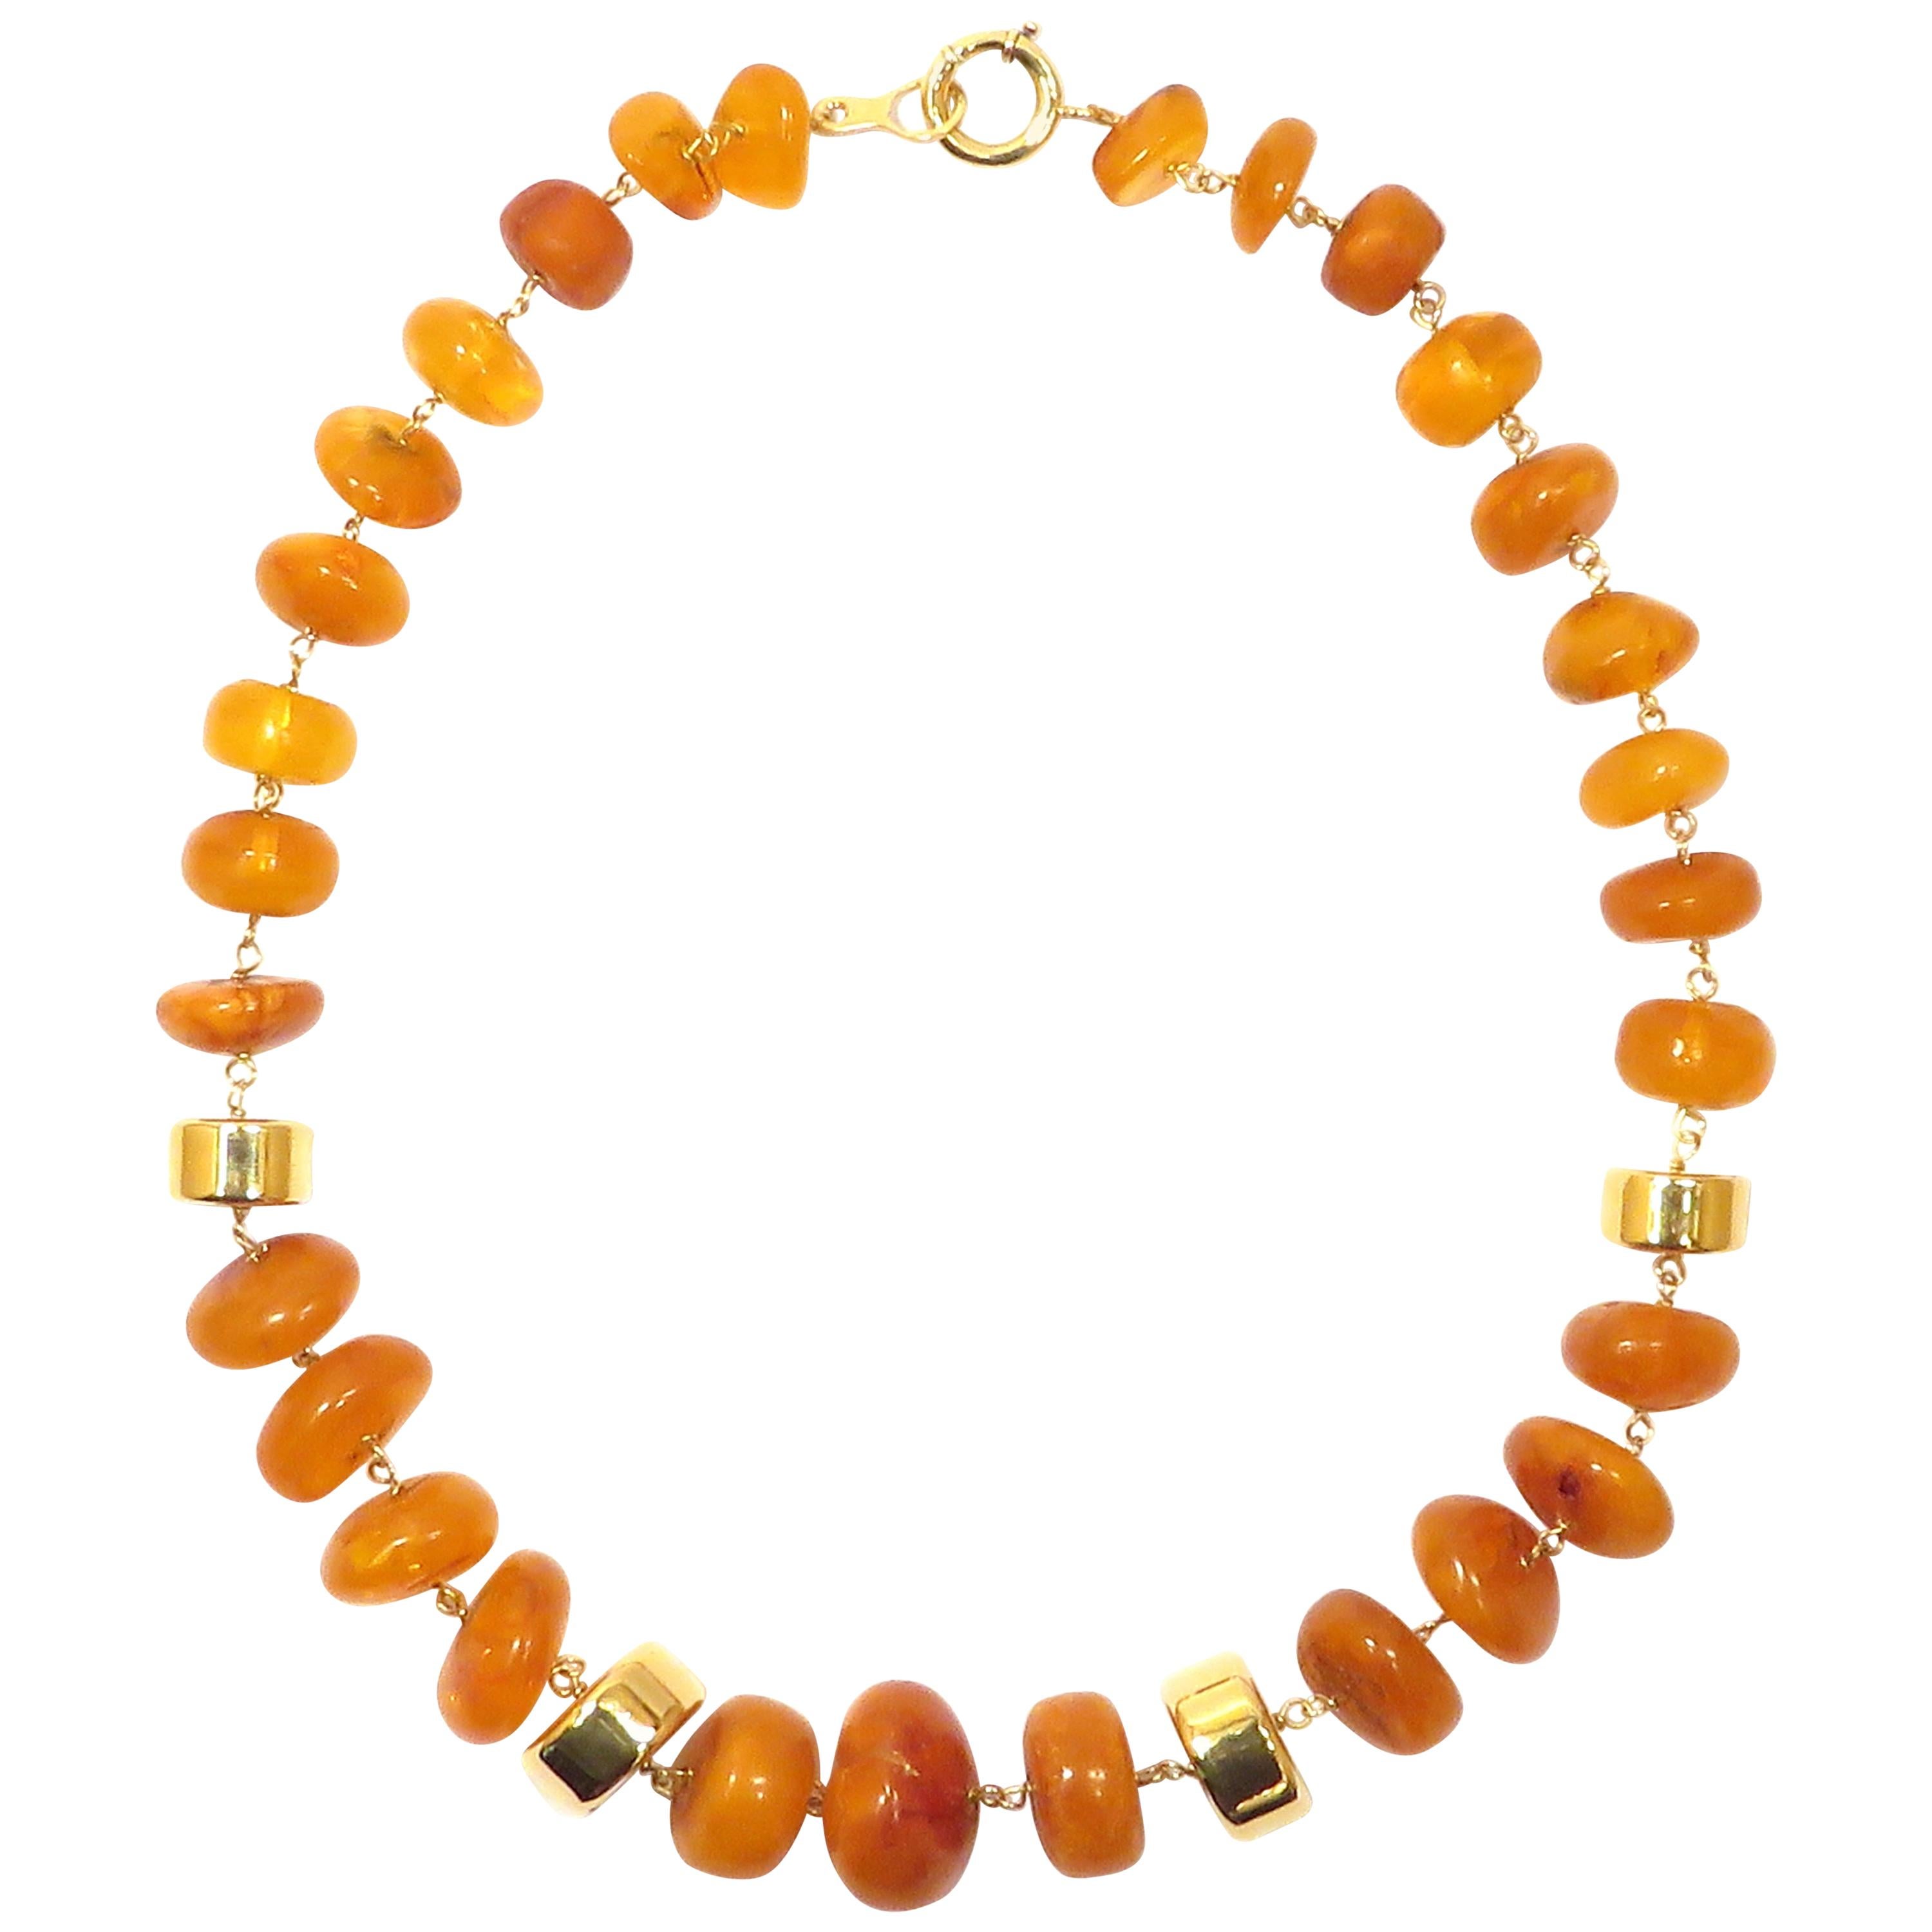 Amber 18 Karat Yellow Gold Necklace Handcrafted in Italy by Botta Gioielli